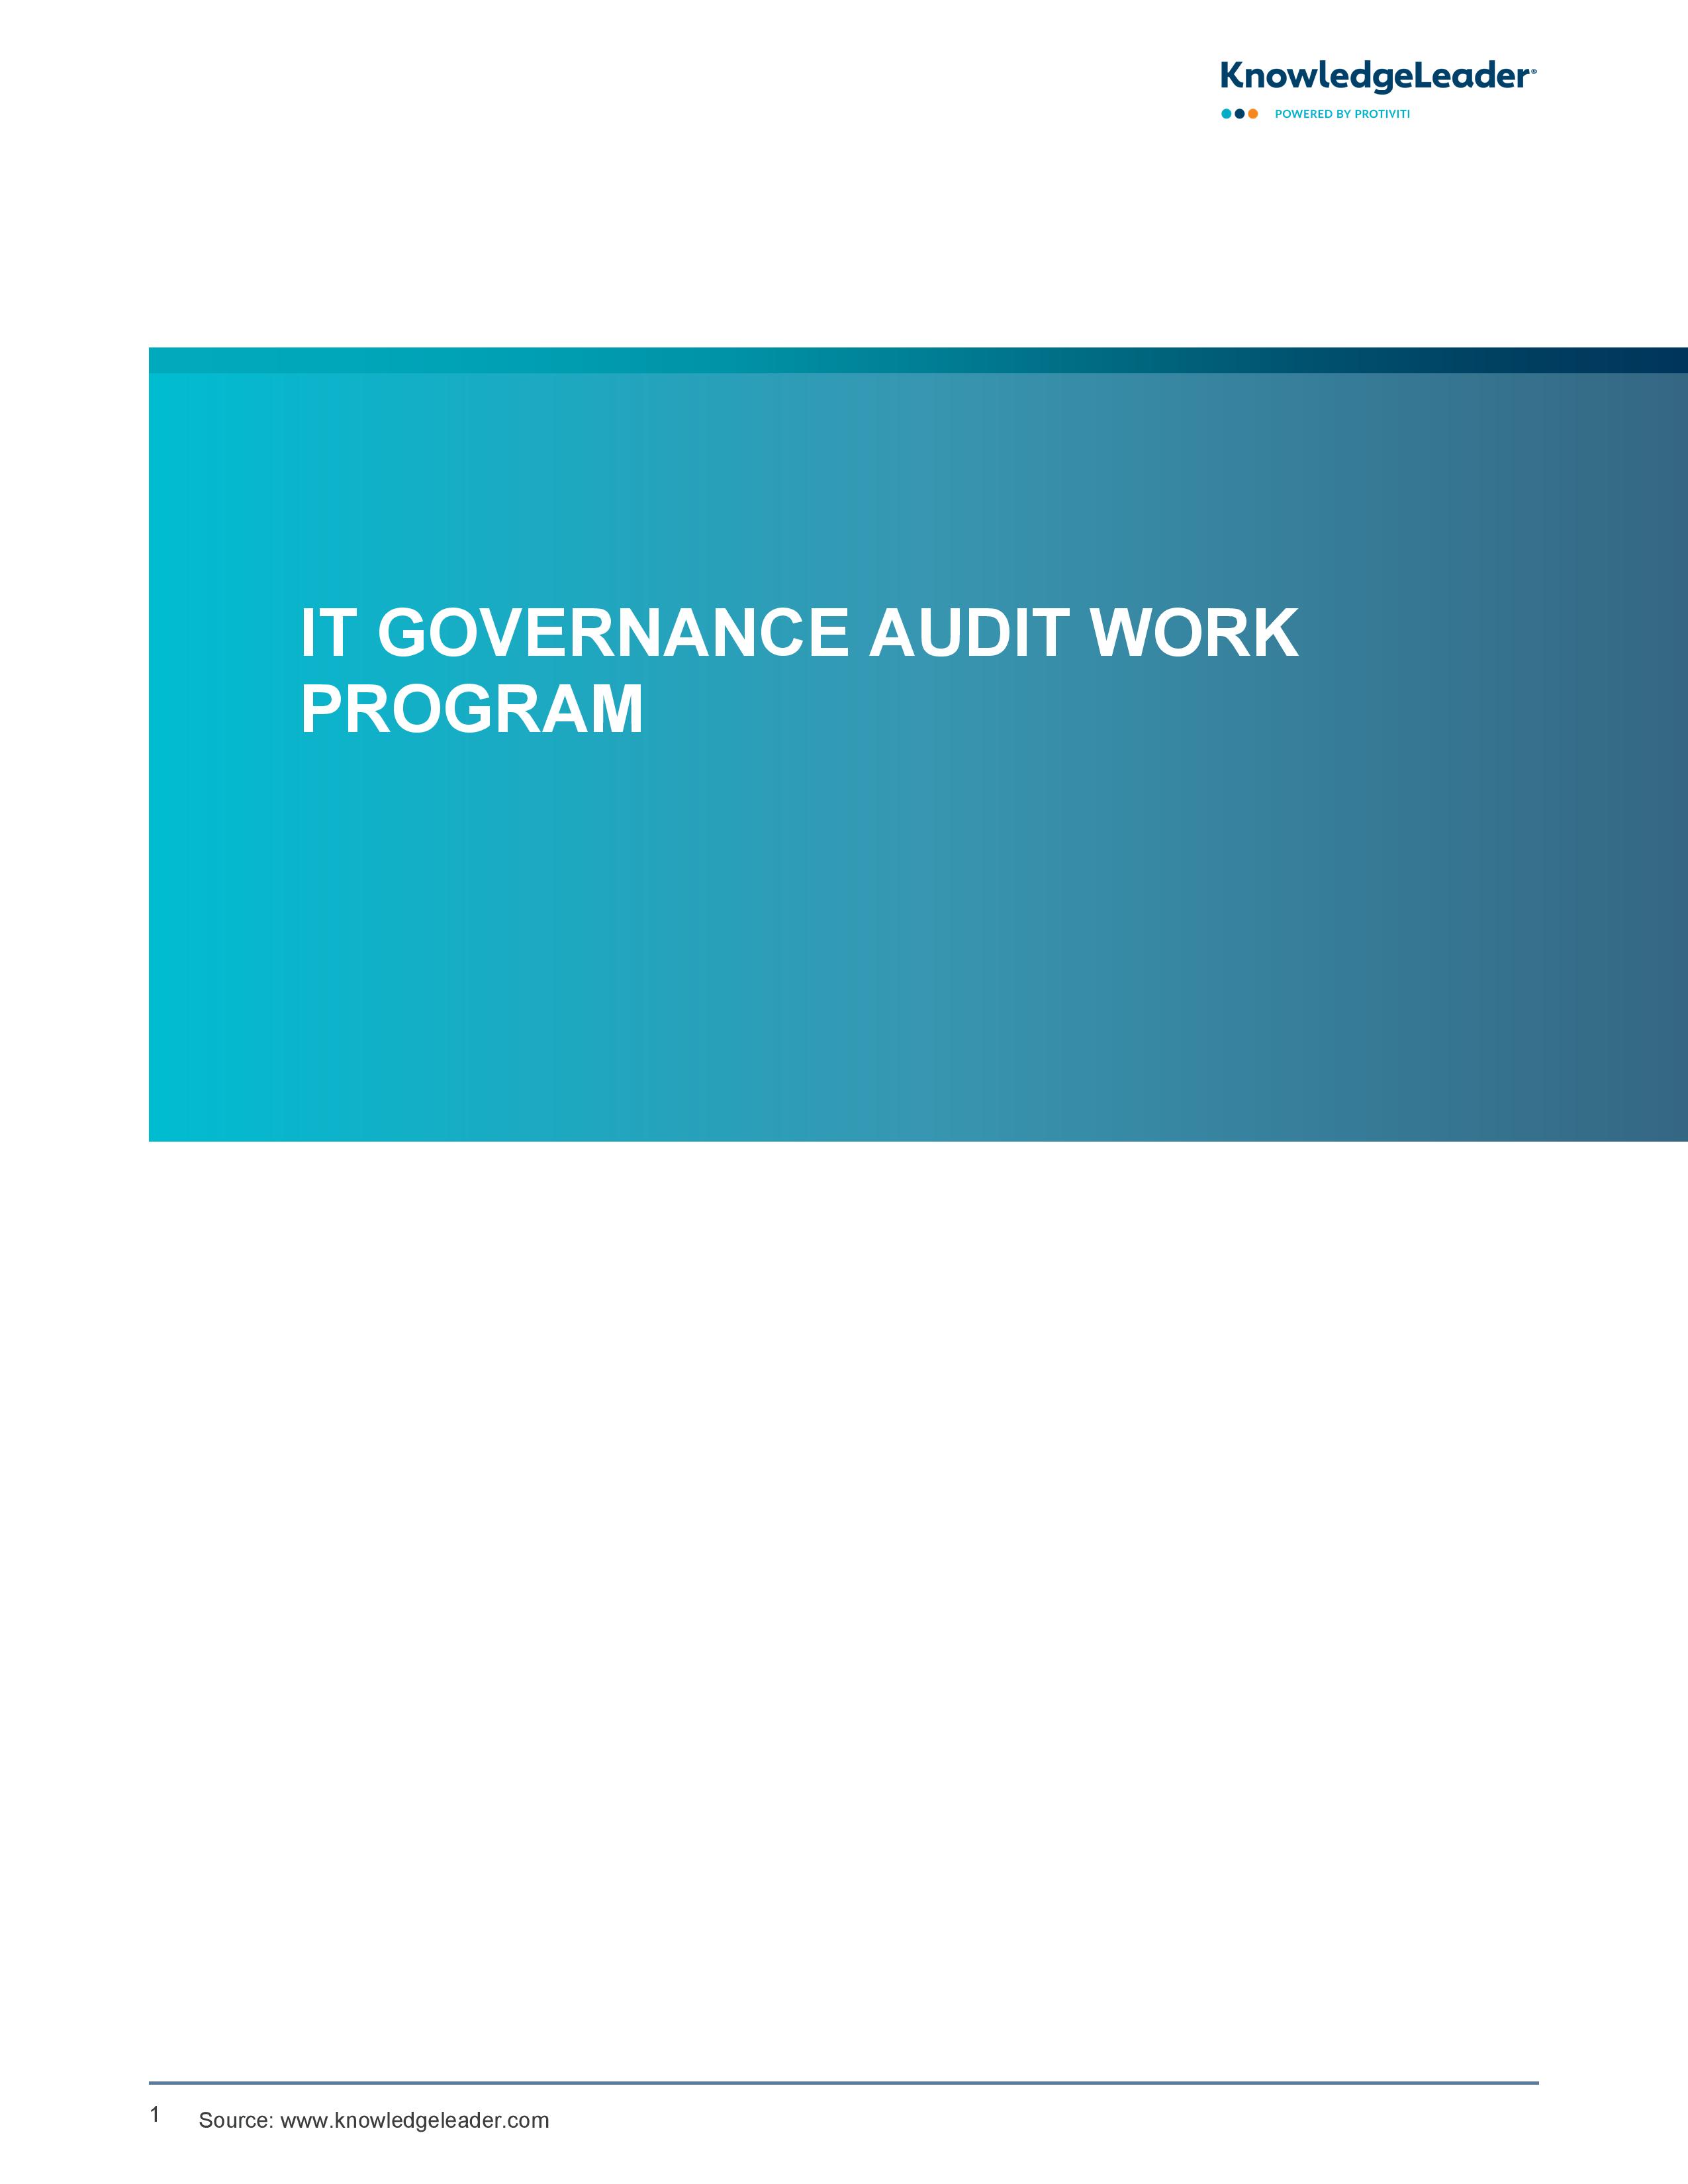 screenshot of the first page of IT Governance Audit Work Program